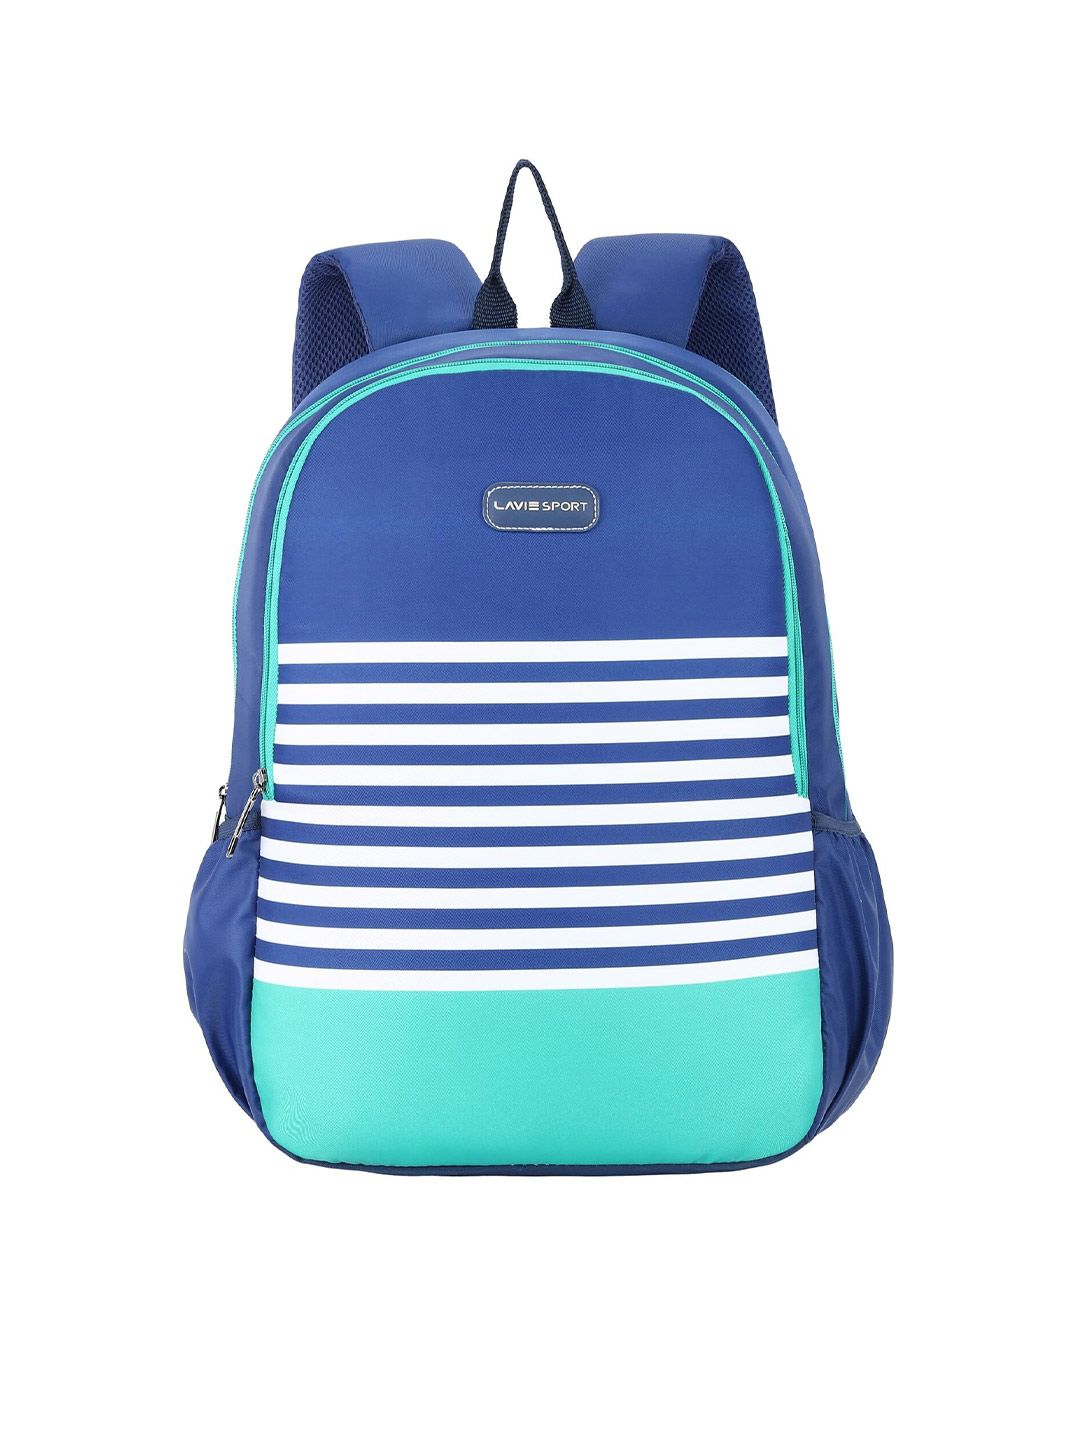 LAVIE SPORT Unisex Navy Blue & Sea Green Striped Backpack Price in India